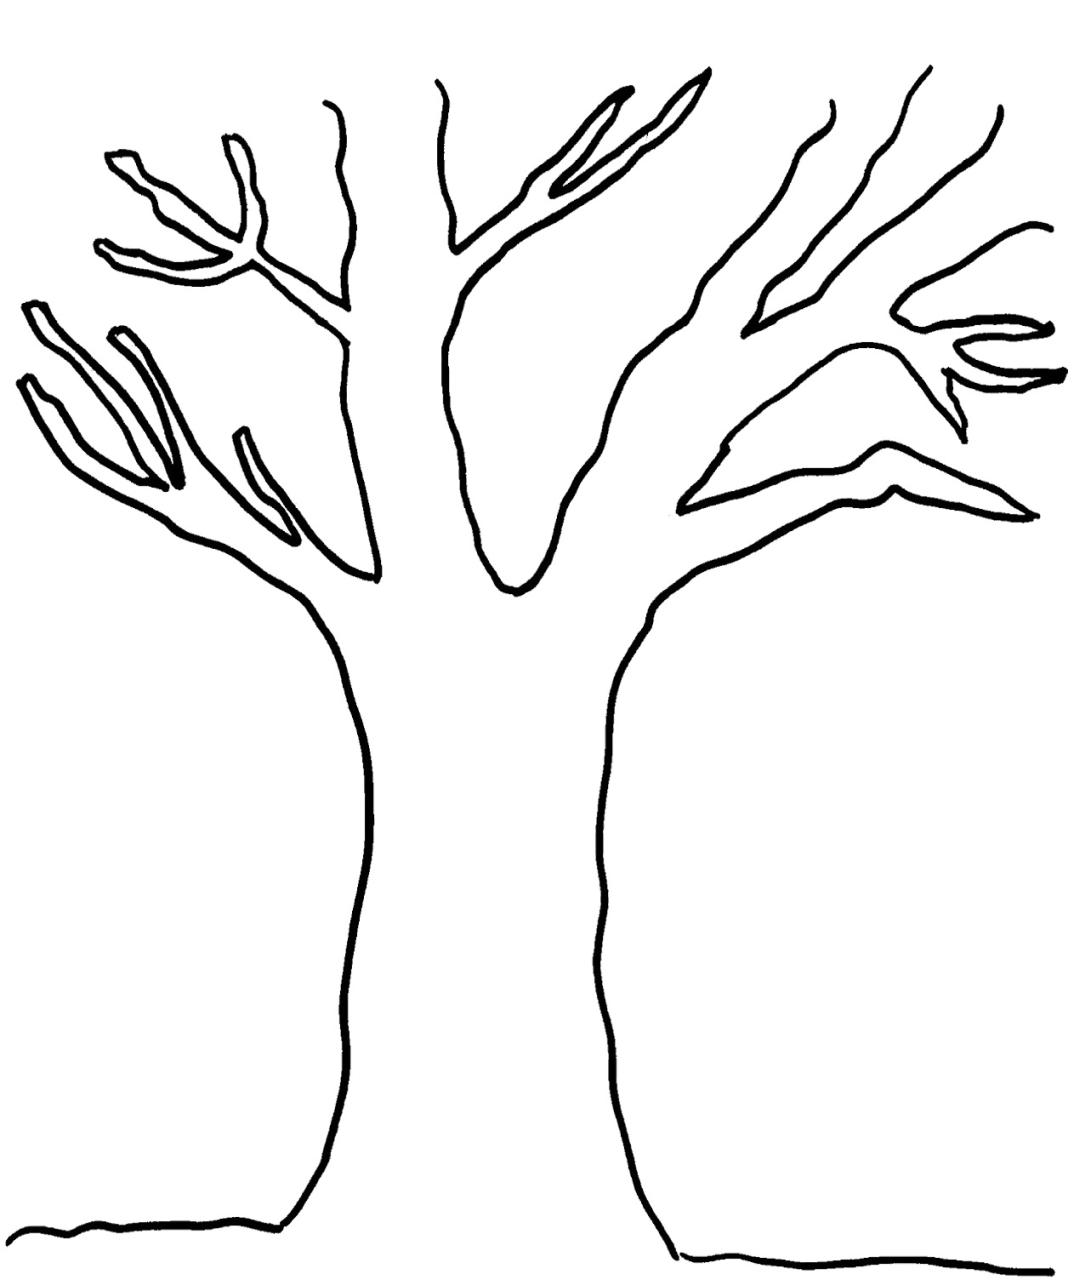 8 Best Images of Printable Trees With No Leaves Tree with No Leaves